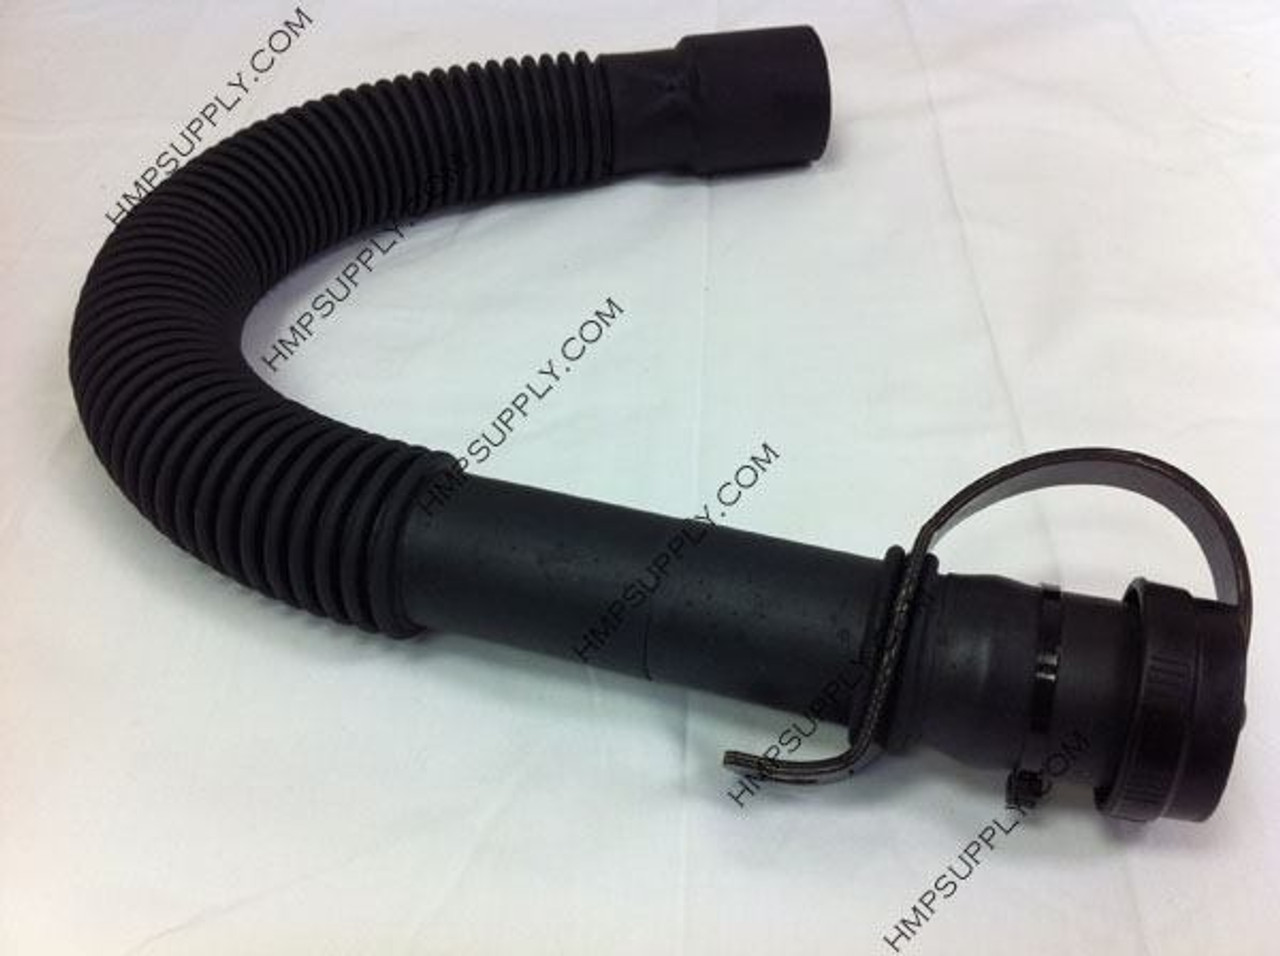 TN 1011168 27-1/2" Recovery Tank Drain Hose Assembly with Strap and Cap for Tennant Scrubbers